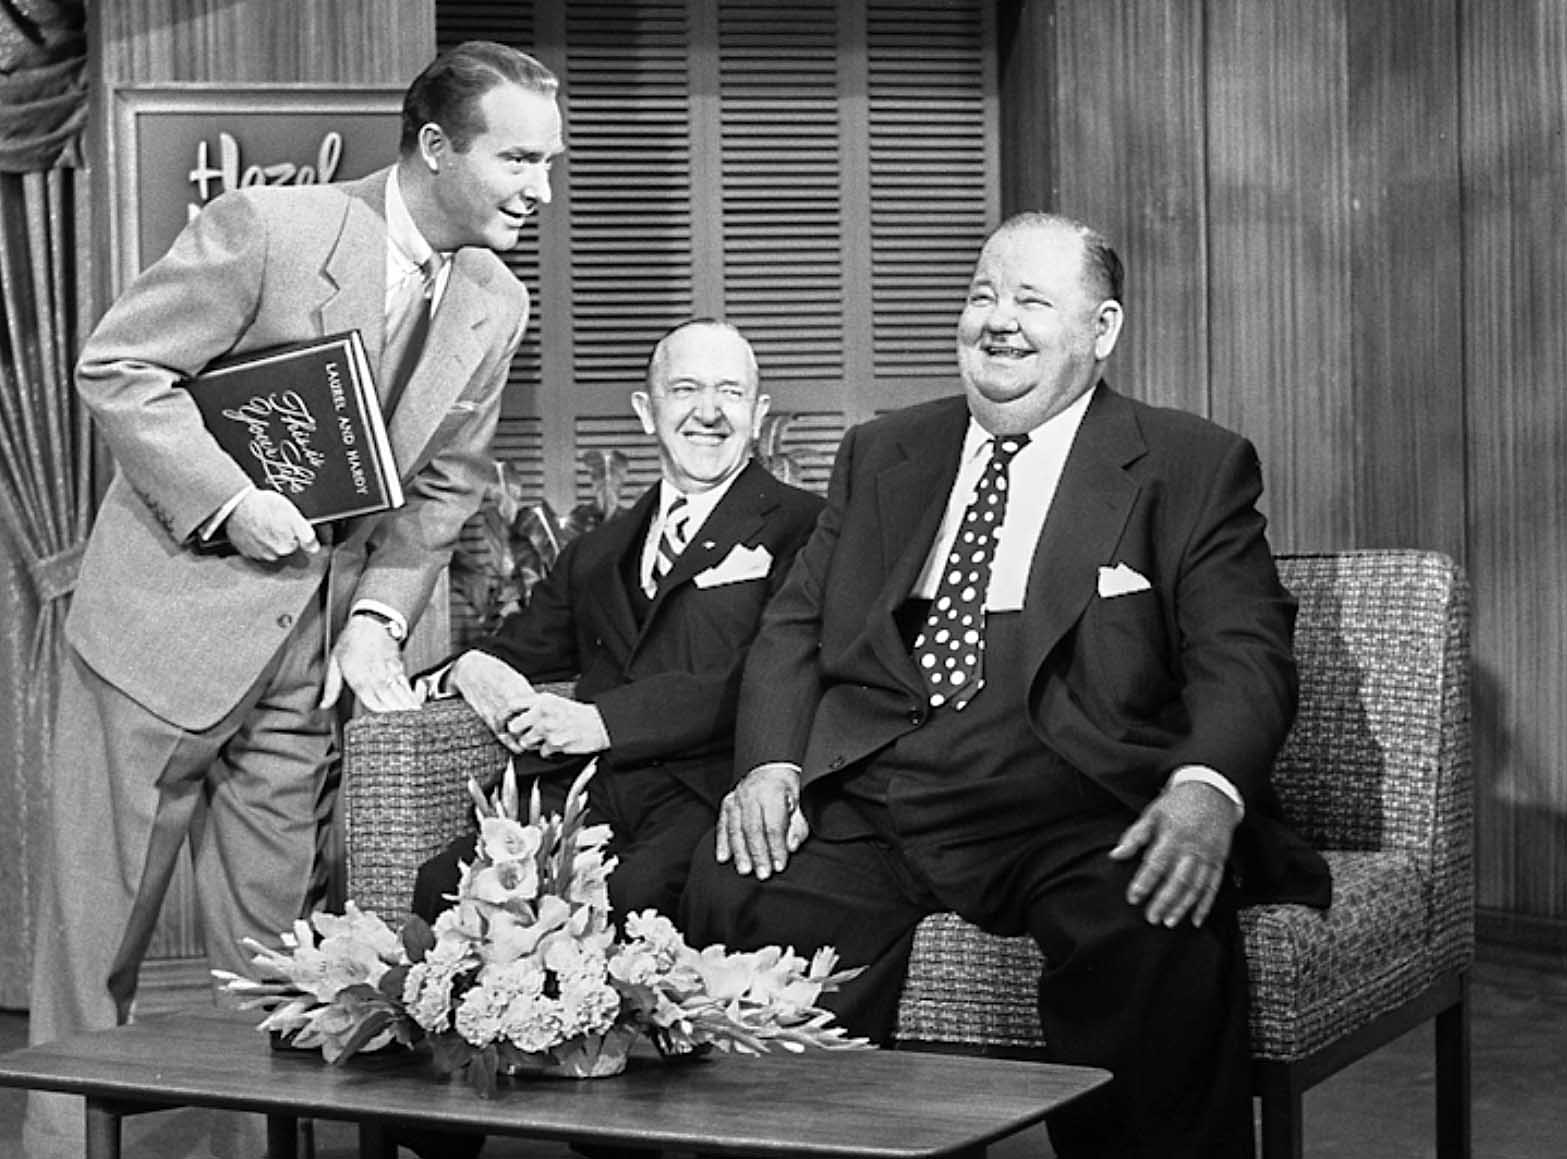 Ralph Edwards with Laurel and Hardy on This Is Your Life